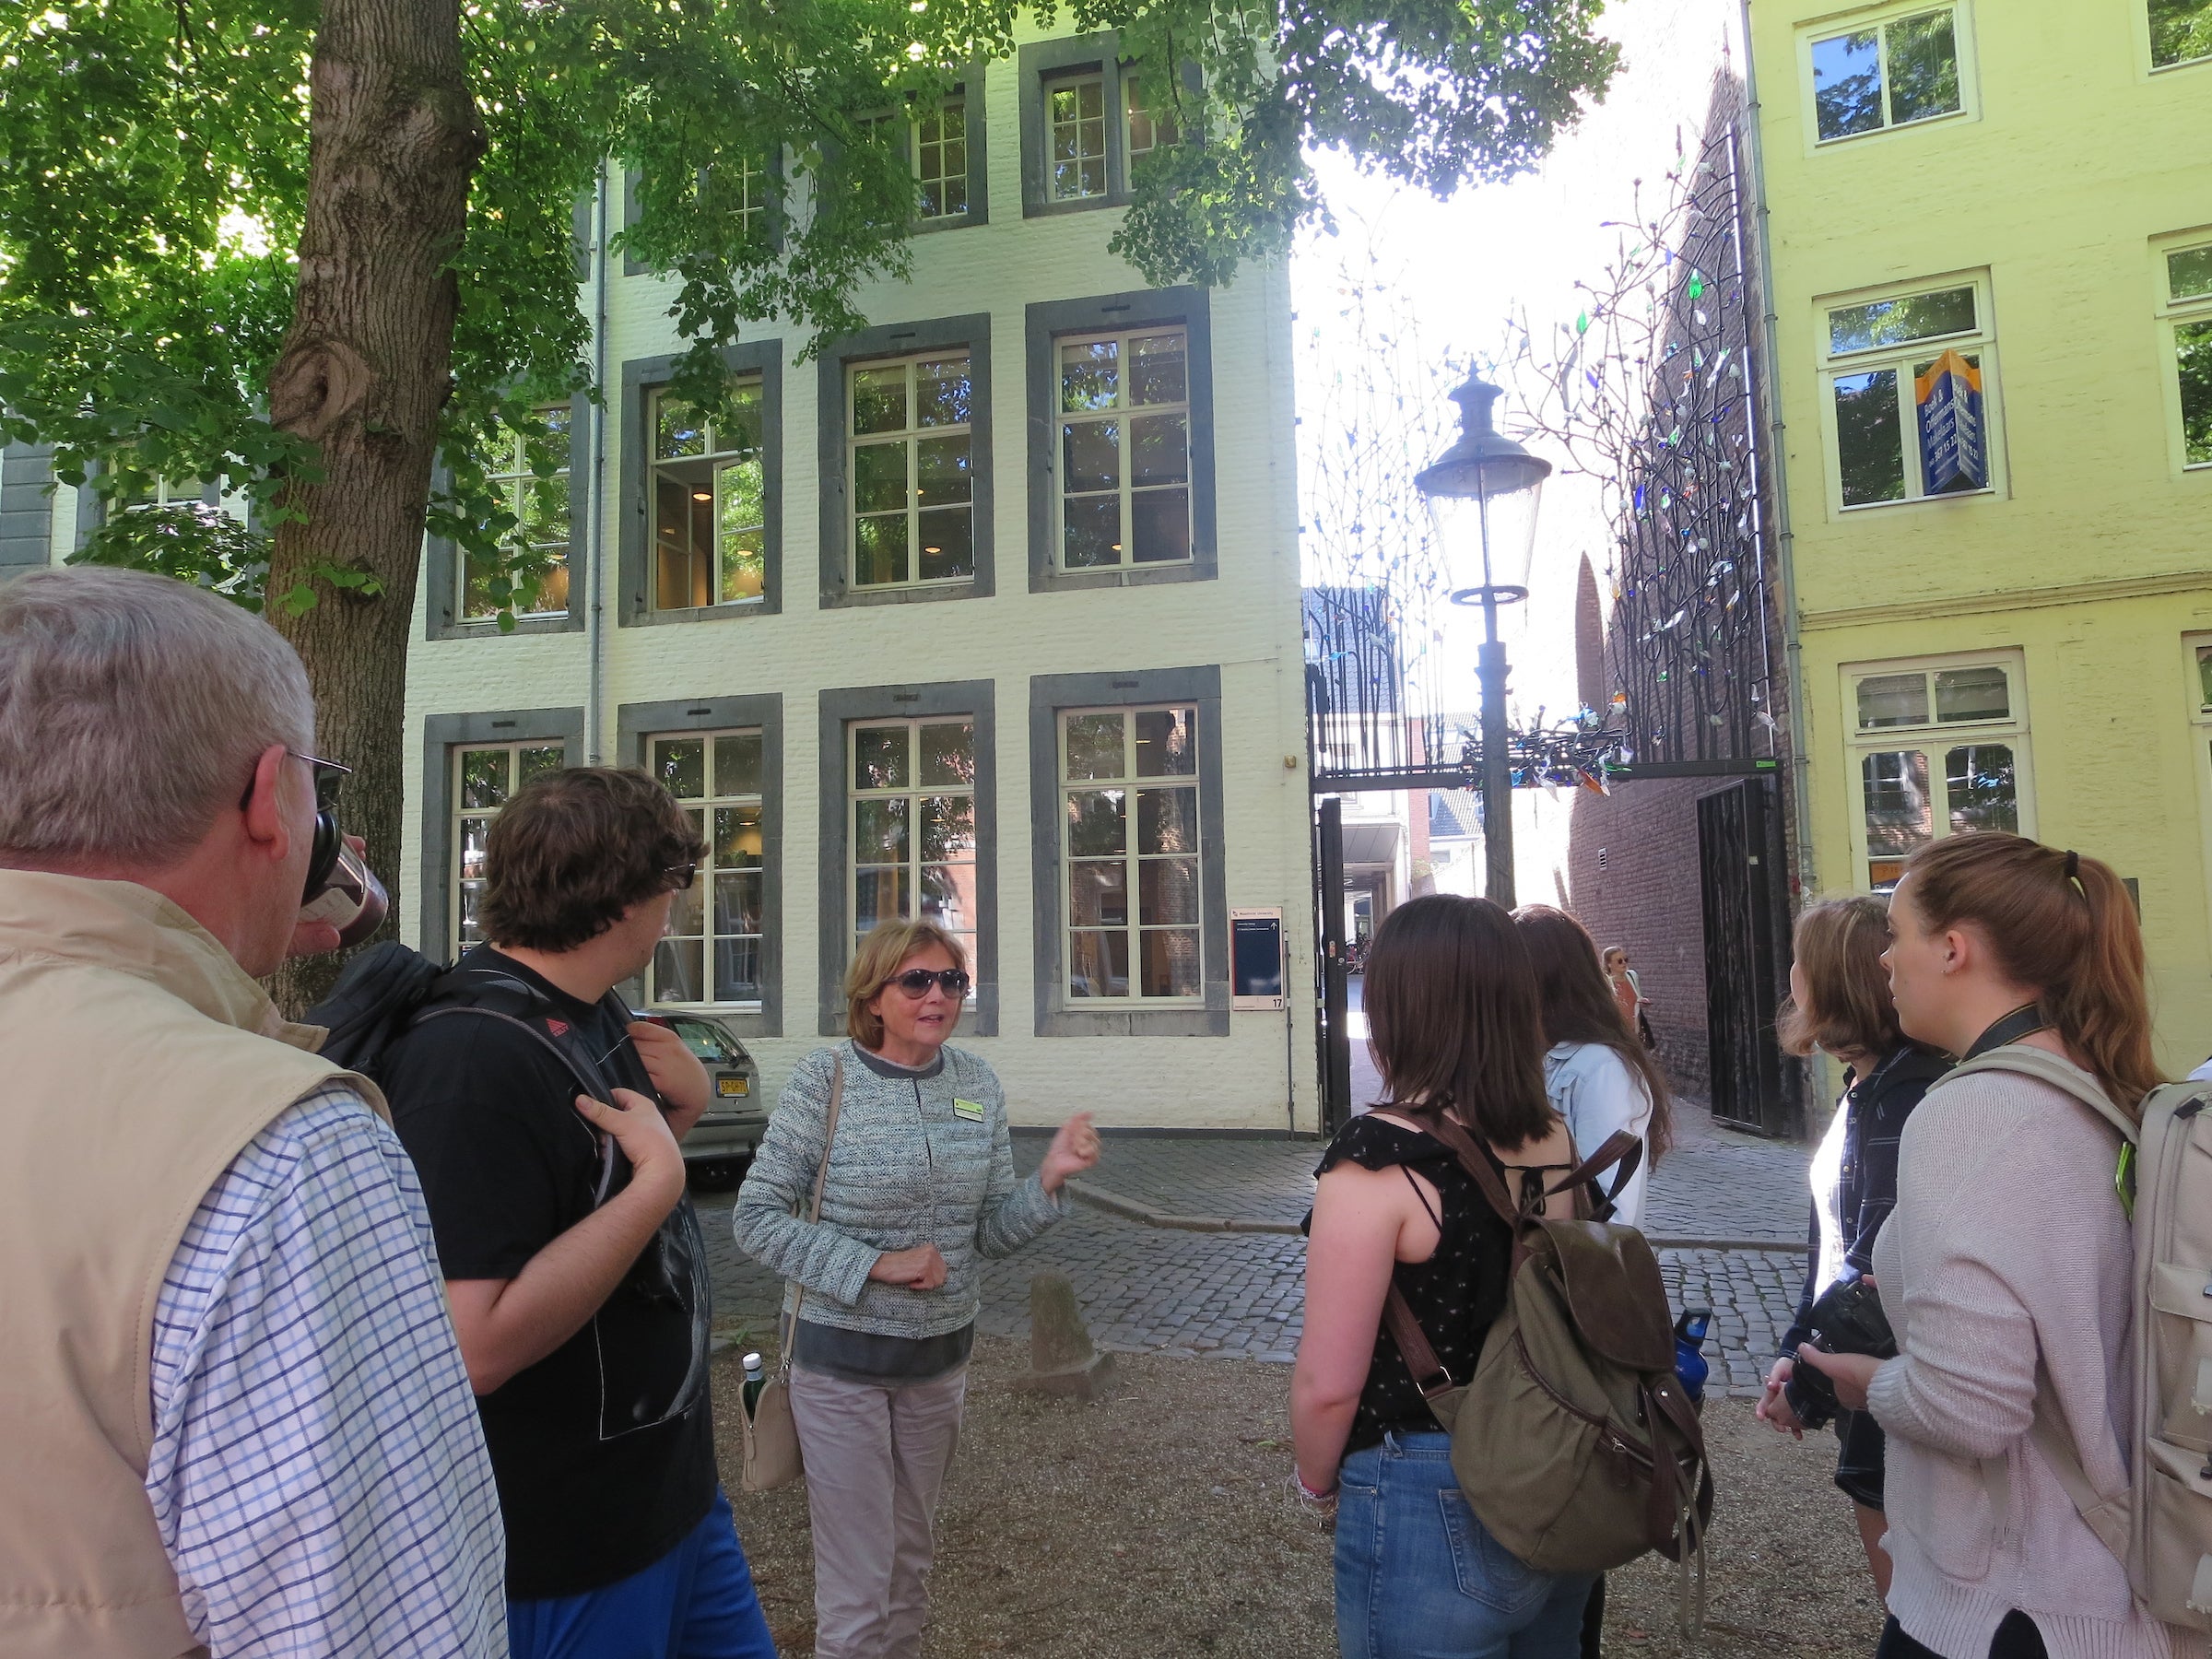 LVC students on walking tour during summer study abroad program in Maastricht, Netherlands